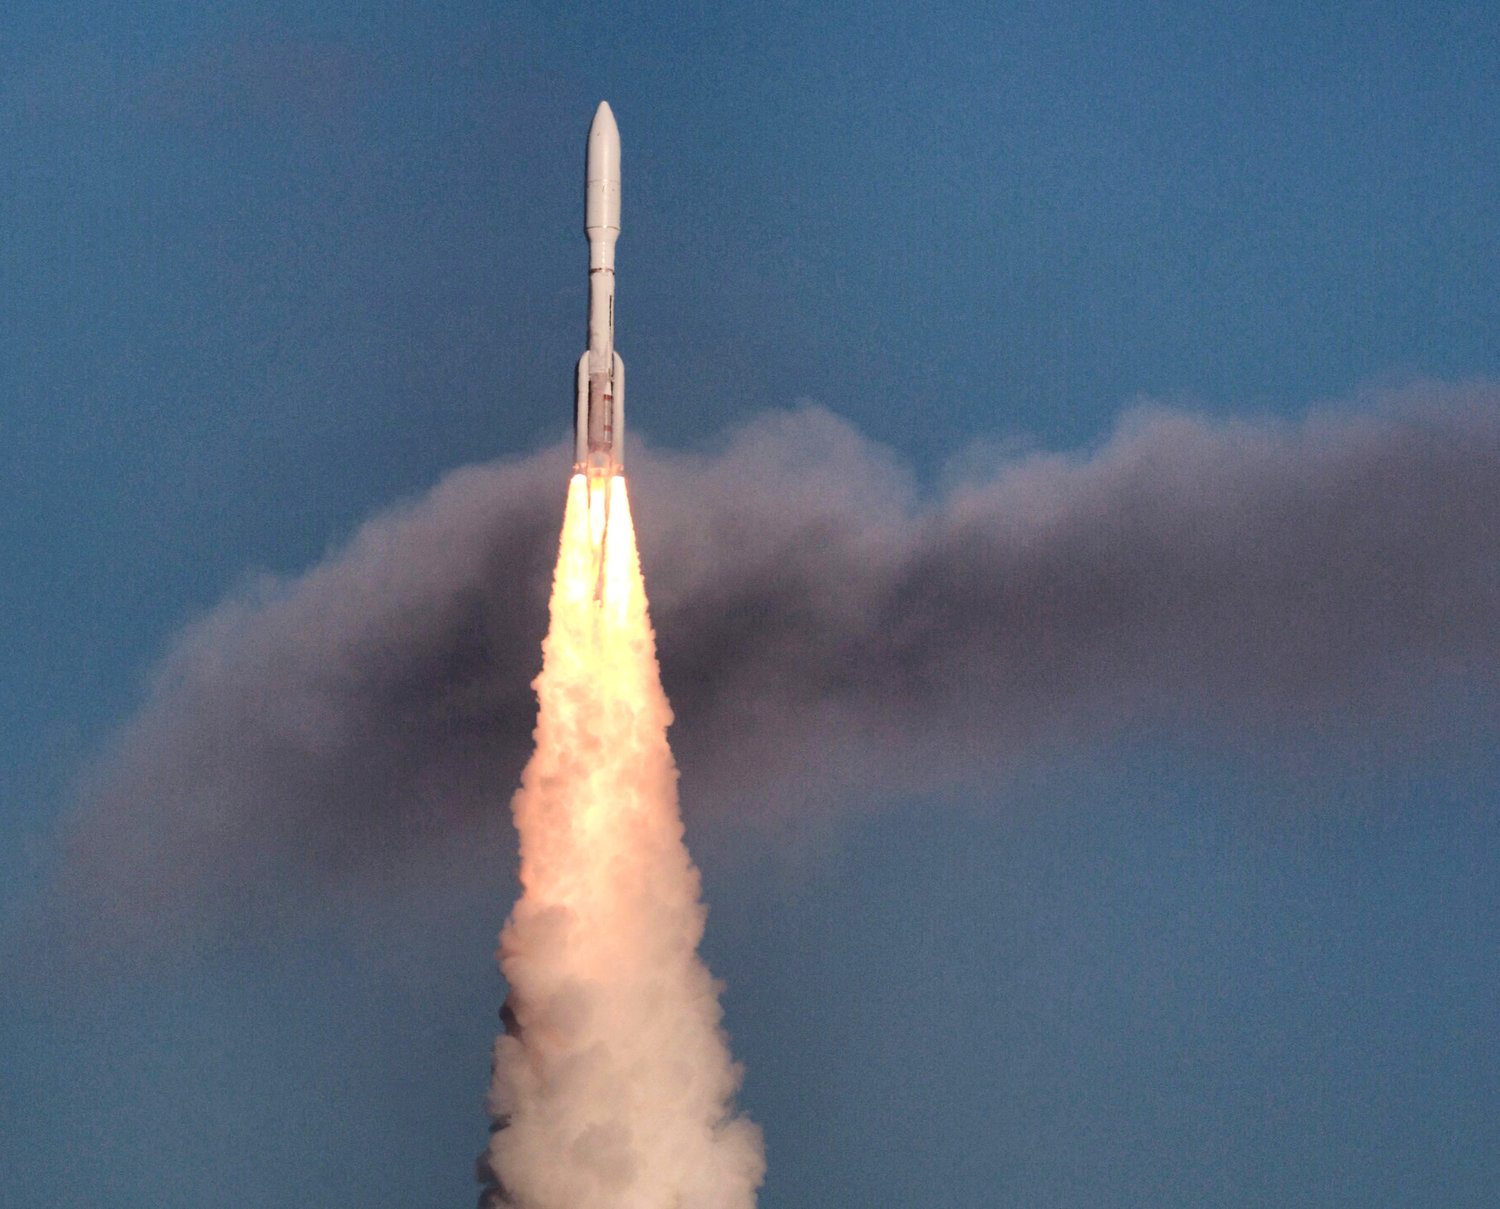 A ULA Atlas V rocket lifts off from Cape Canaveral Space Force Station, Florida, carrying a GOES-T weather satellite, on March 1, 2022.  (Joe Burbank/Orlando Sentinel/TNS)